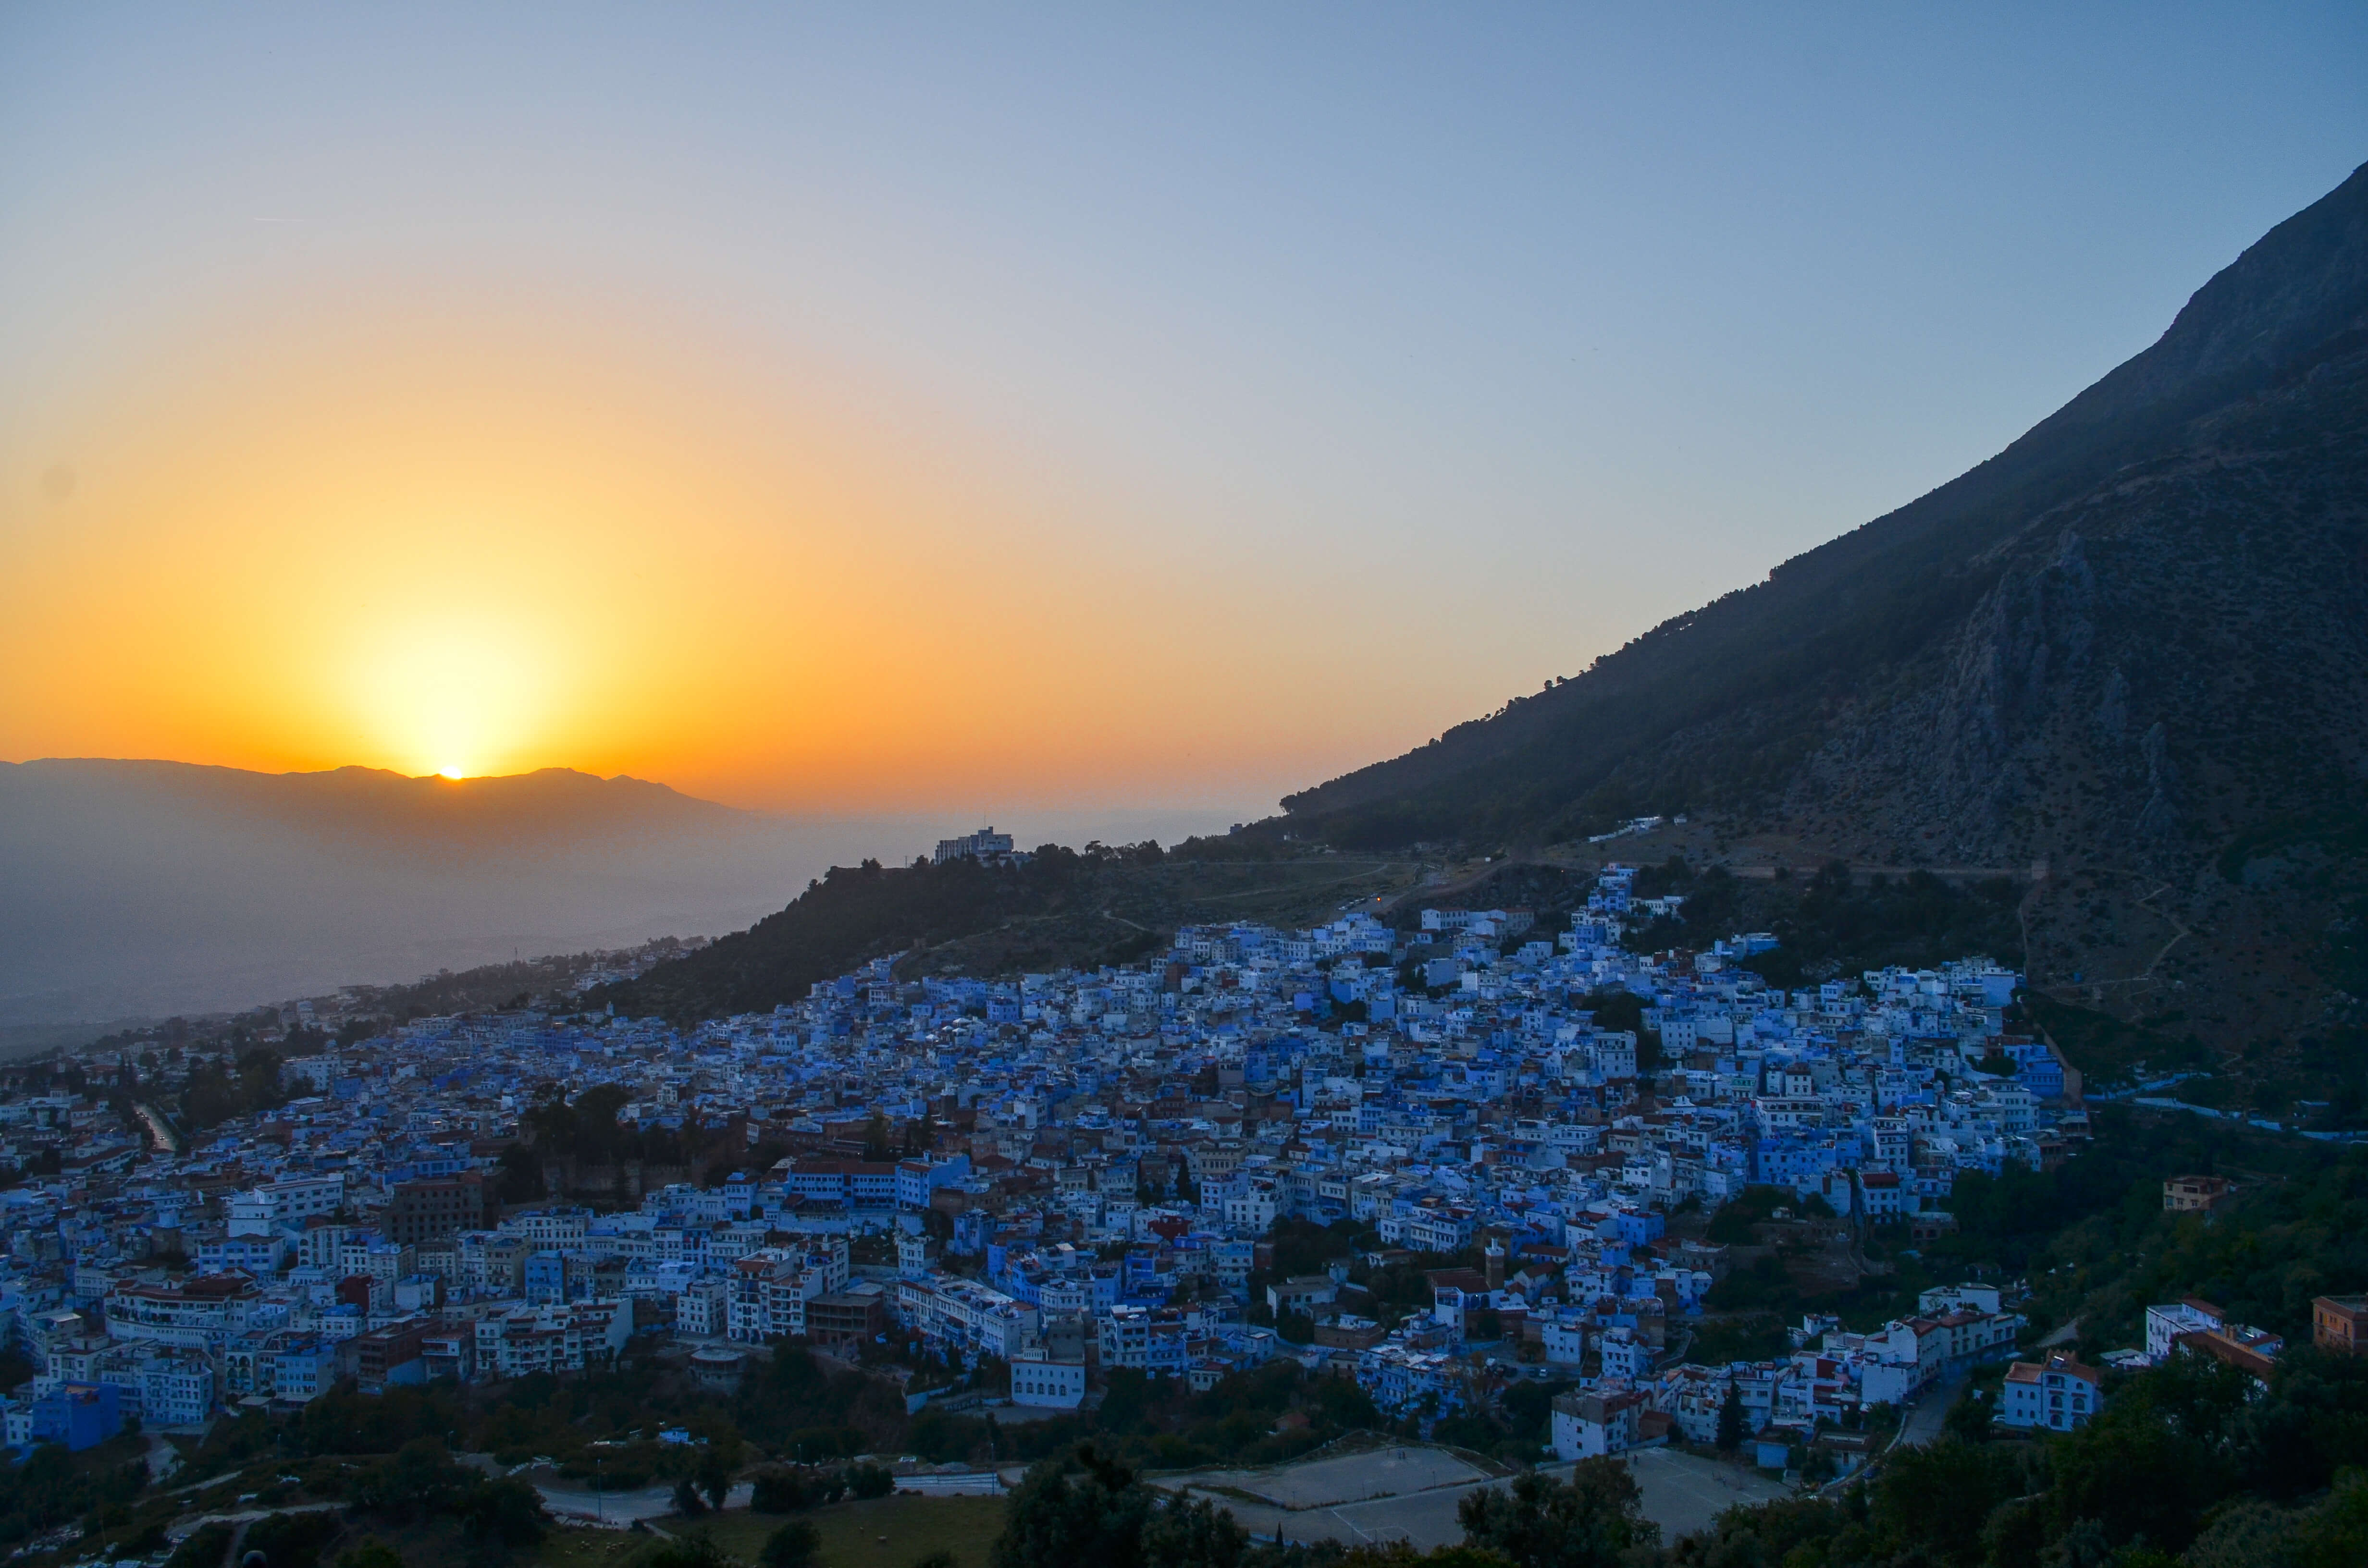 Sunset over Chefchaouen, Morocco